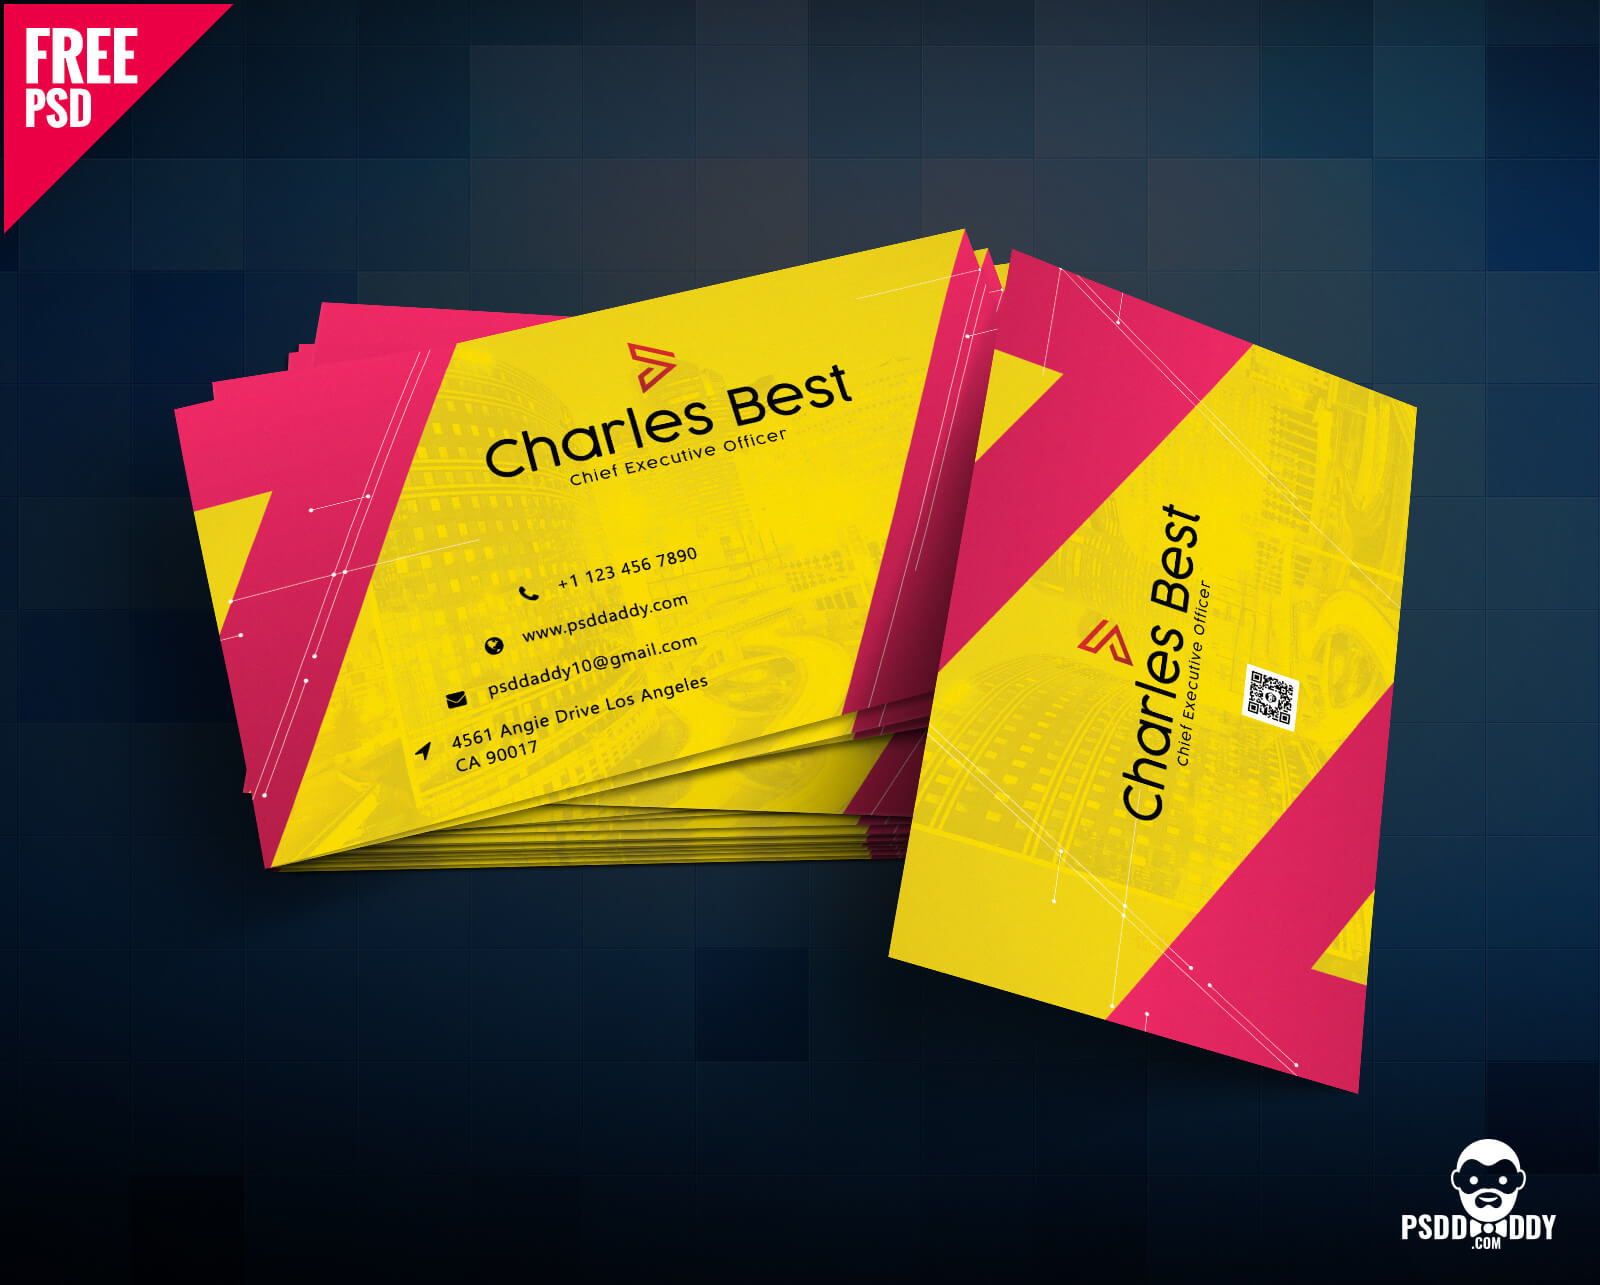 Download] Creative Business Card Free Psd | Psddaddy Pertaining To Business Card Maker Template